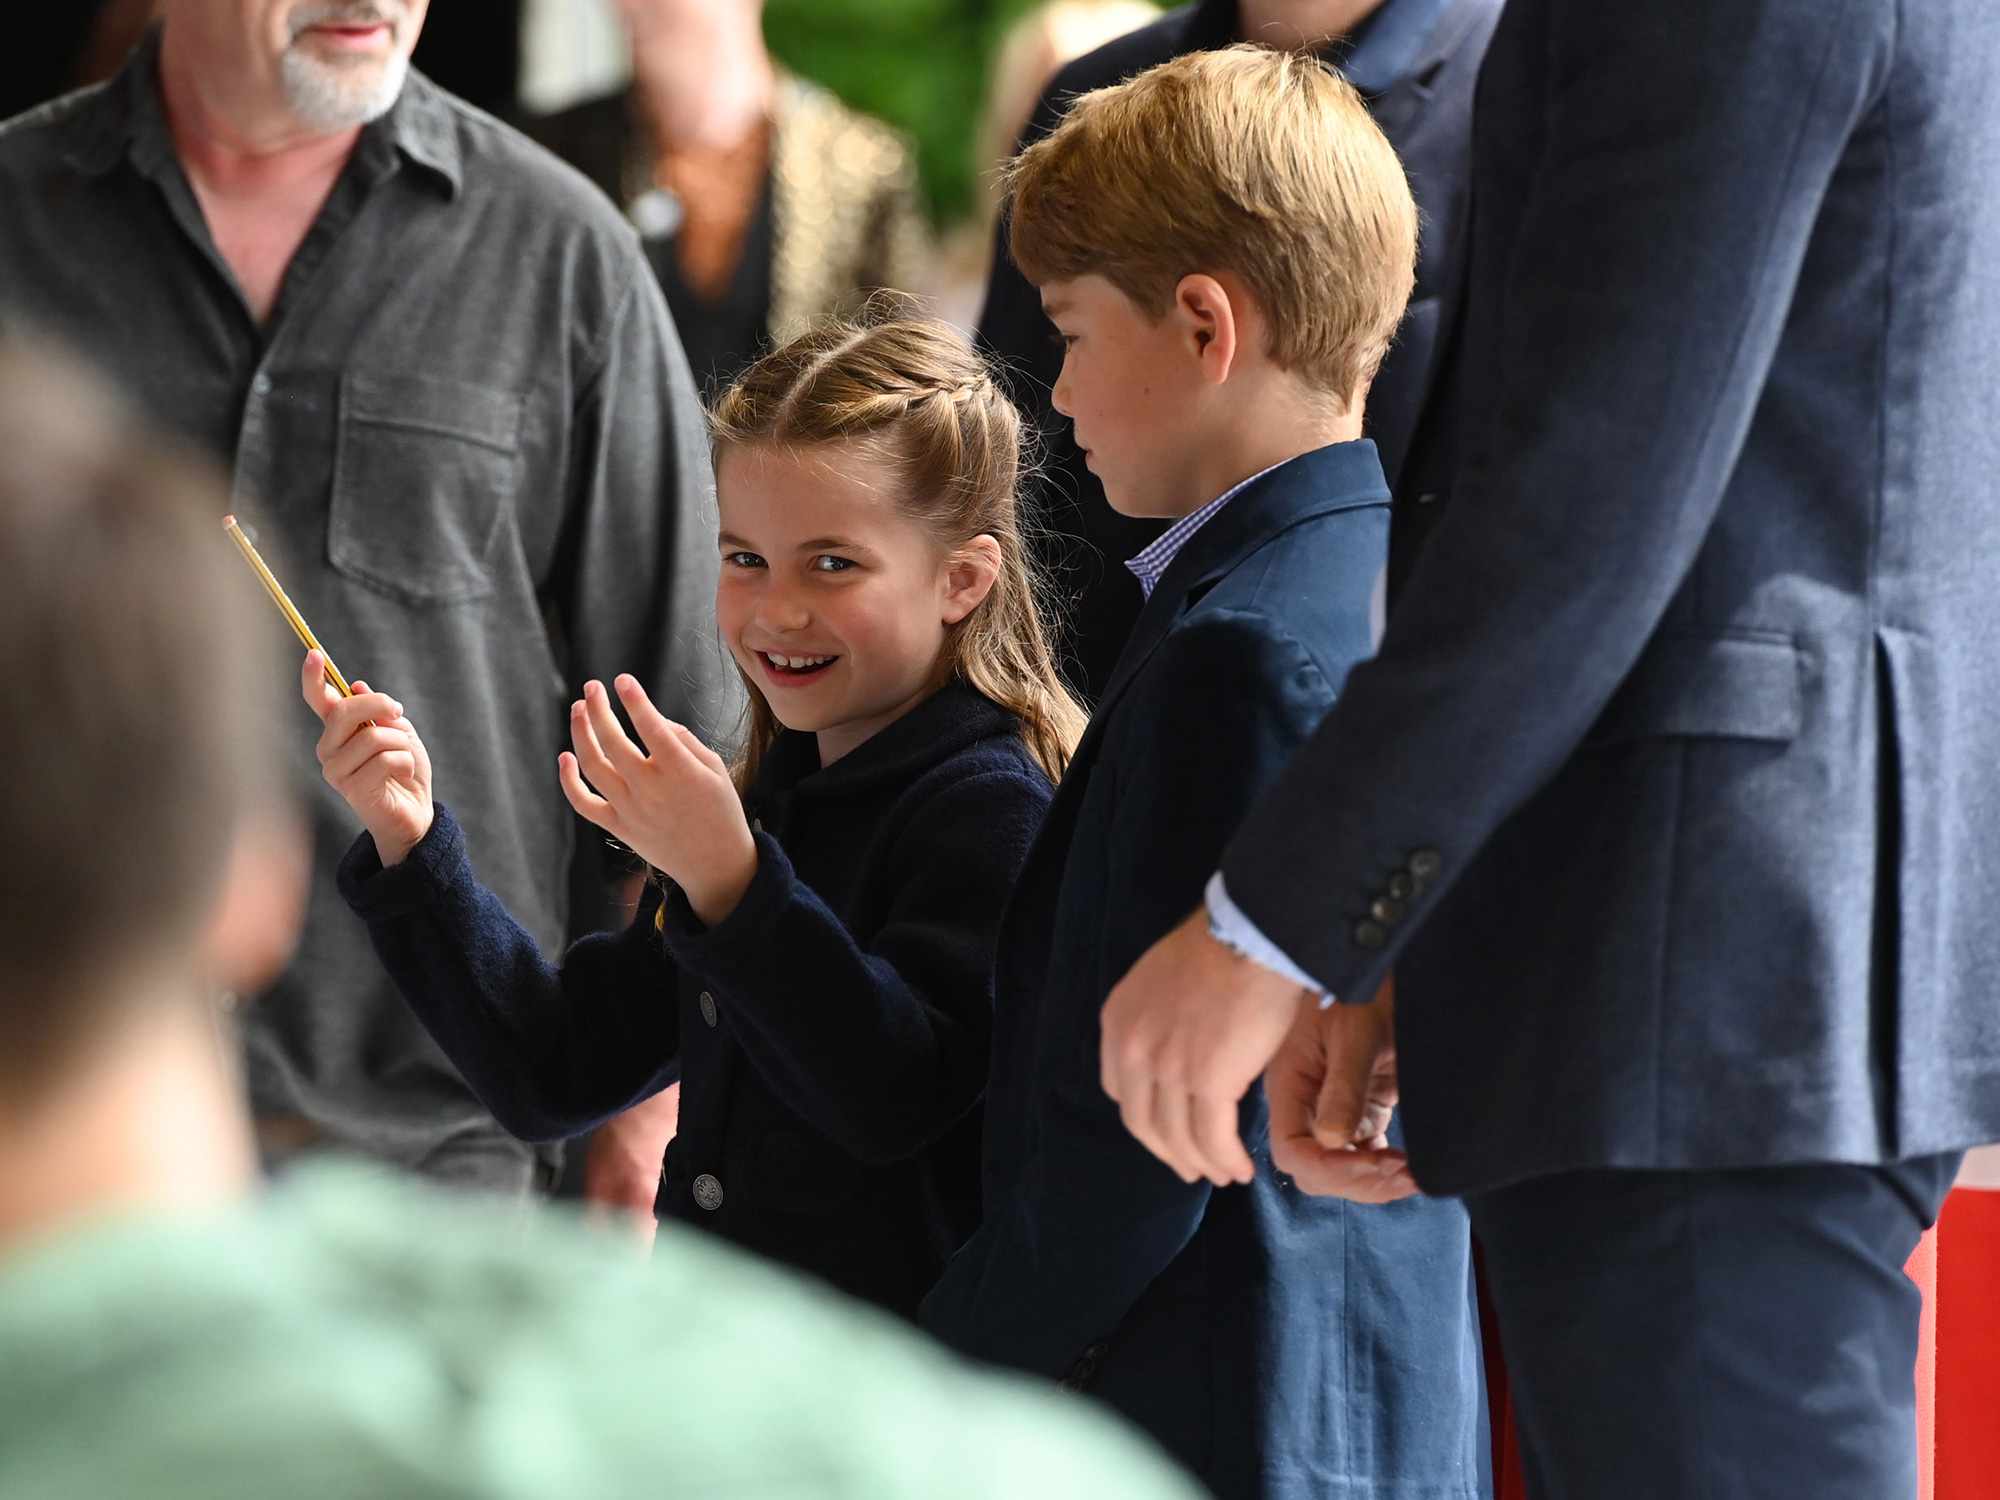 Princess Charlotte of Cambridge laughs as she conducts a band next to her brother Prince George of Cambridge during a visit to Cardiff Castle